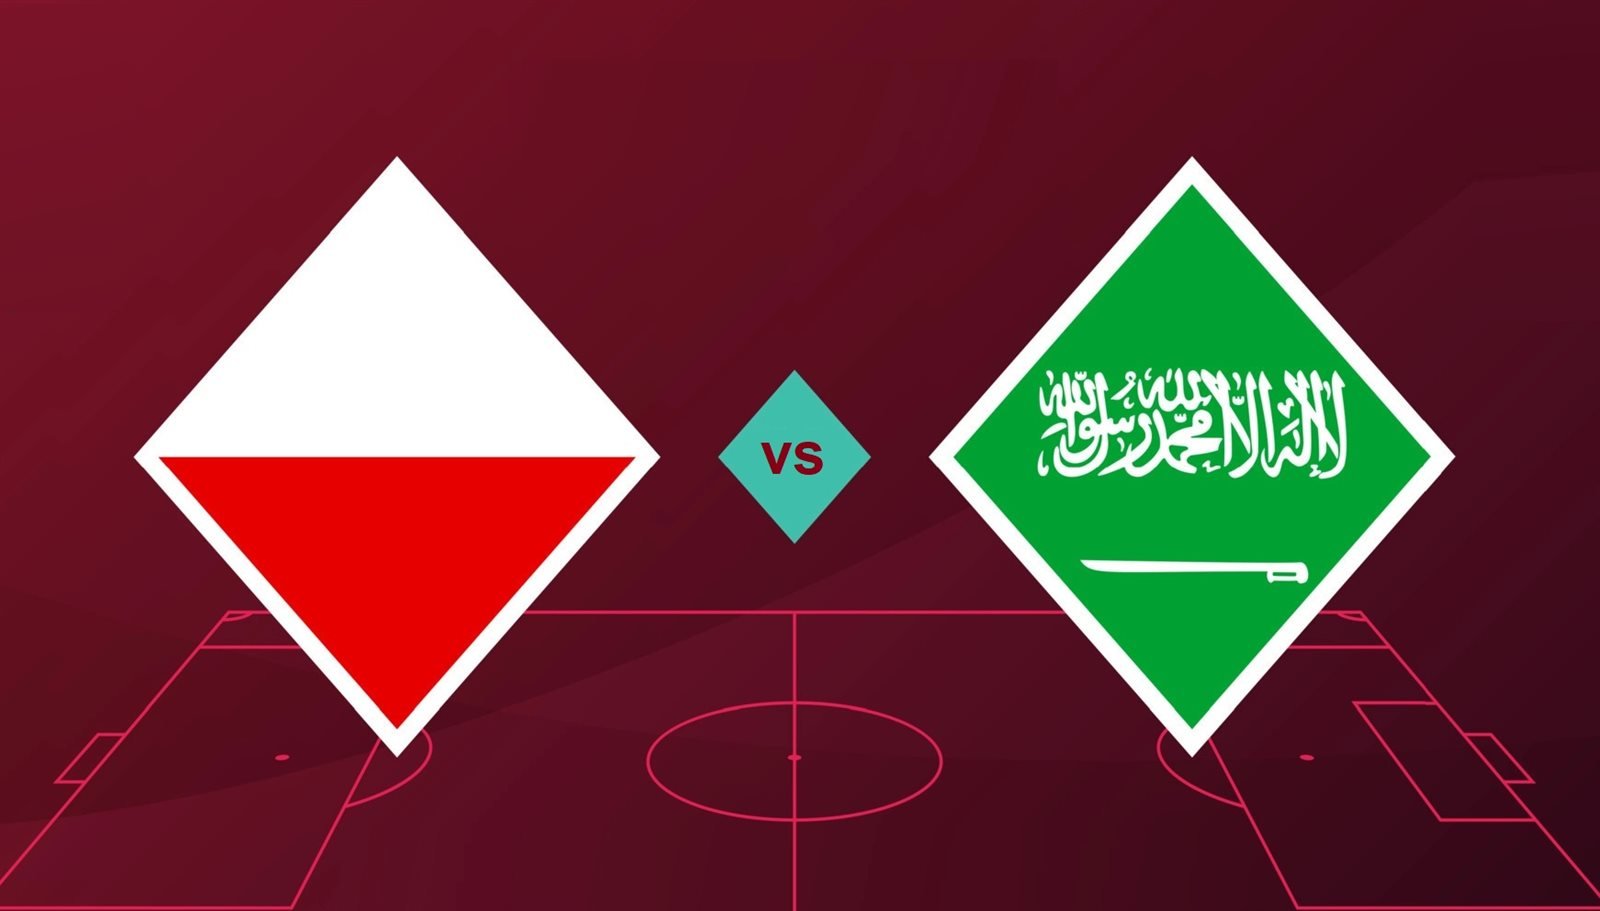 Live stream of the match between Saudi Arabia and Poland in the World Cup qatar 2022 in high quality